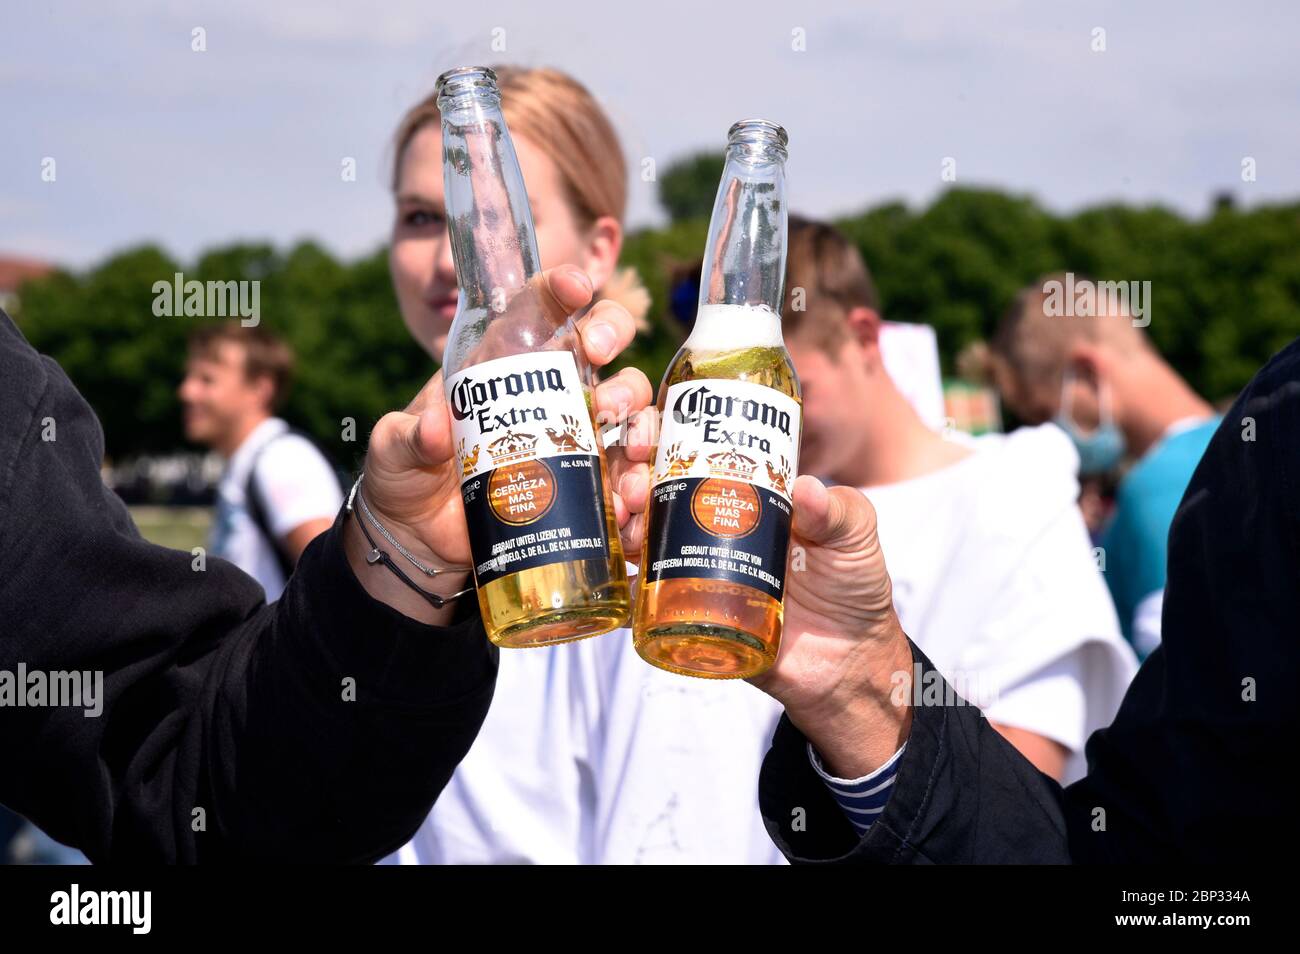 Munich, Deutschland. 16th May, 2020. Demonstration versus the corona measures on the Theresienwiese. Munchen, May 16, 2020 | usage worldwide Credit: dpa/Alamy Live News Stock Photo